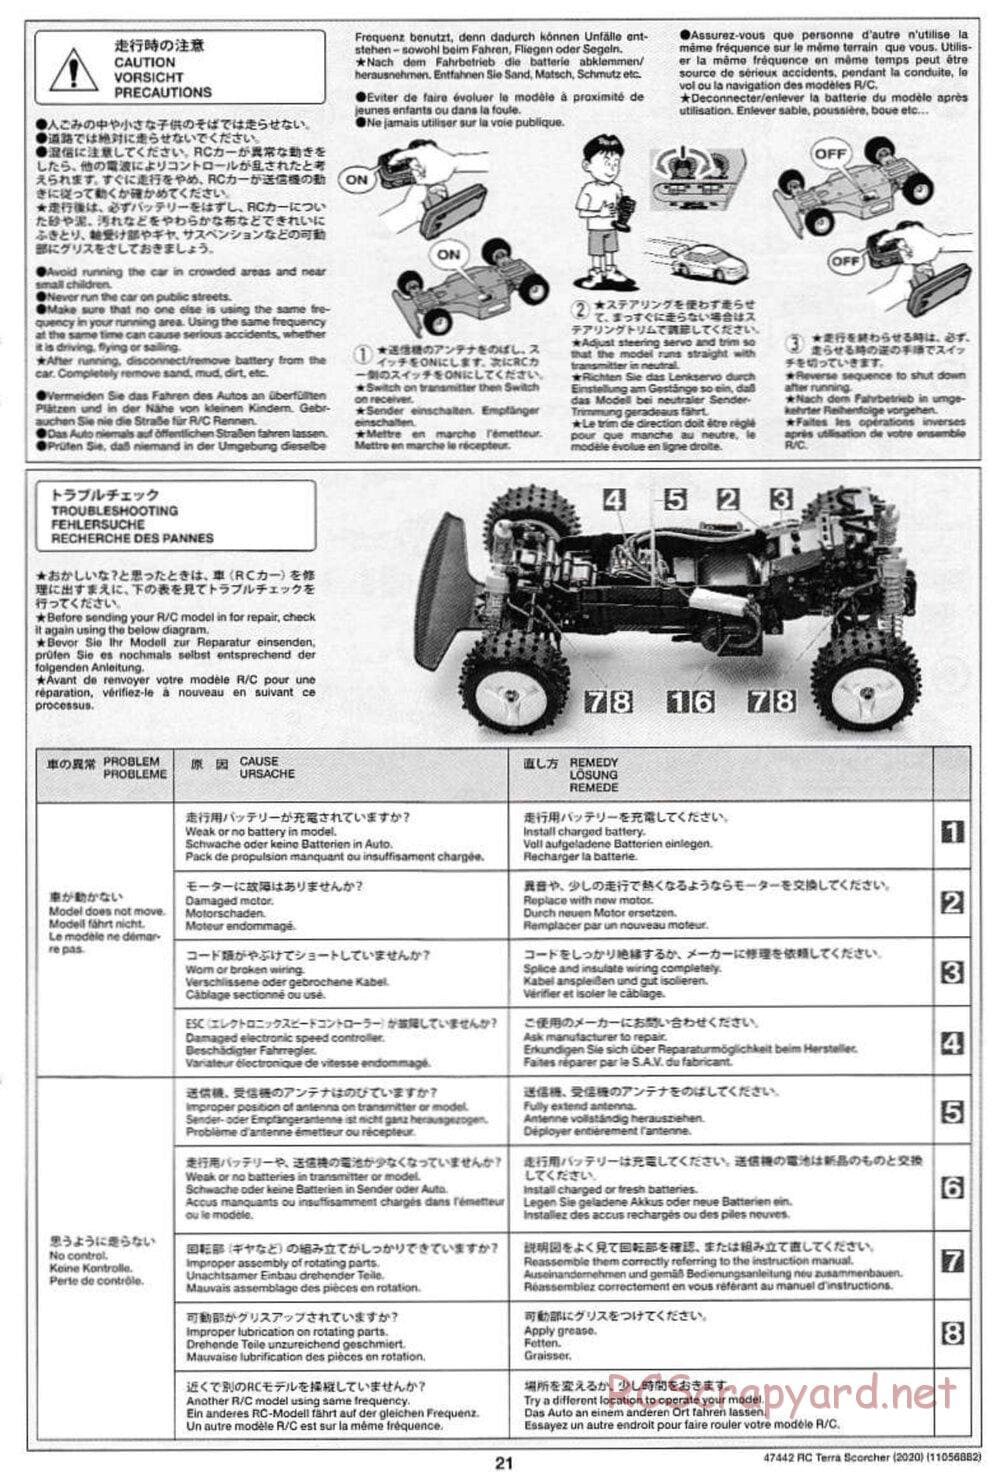 Tamiya - Terra Scorcher 2020 Chassis - Manual - Page 21